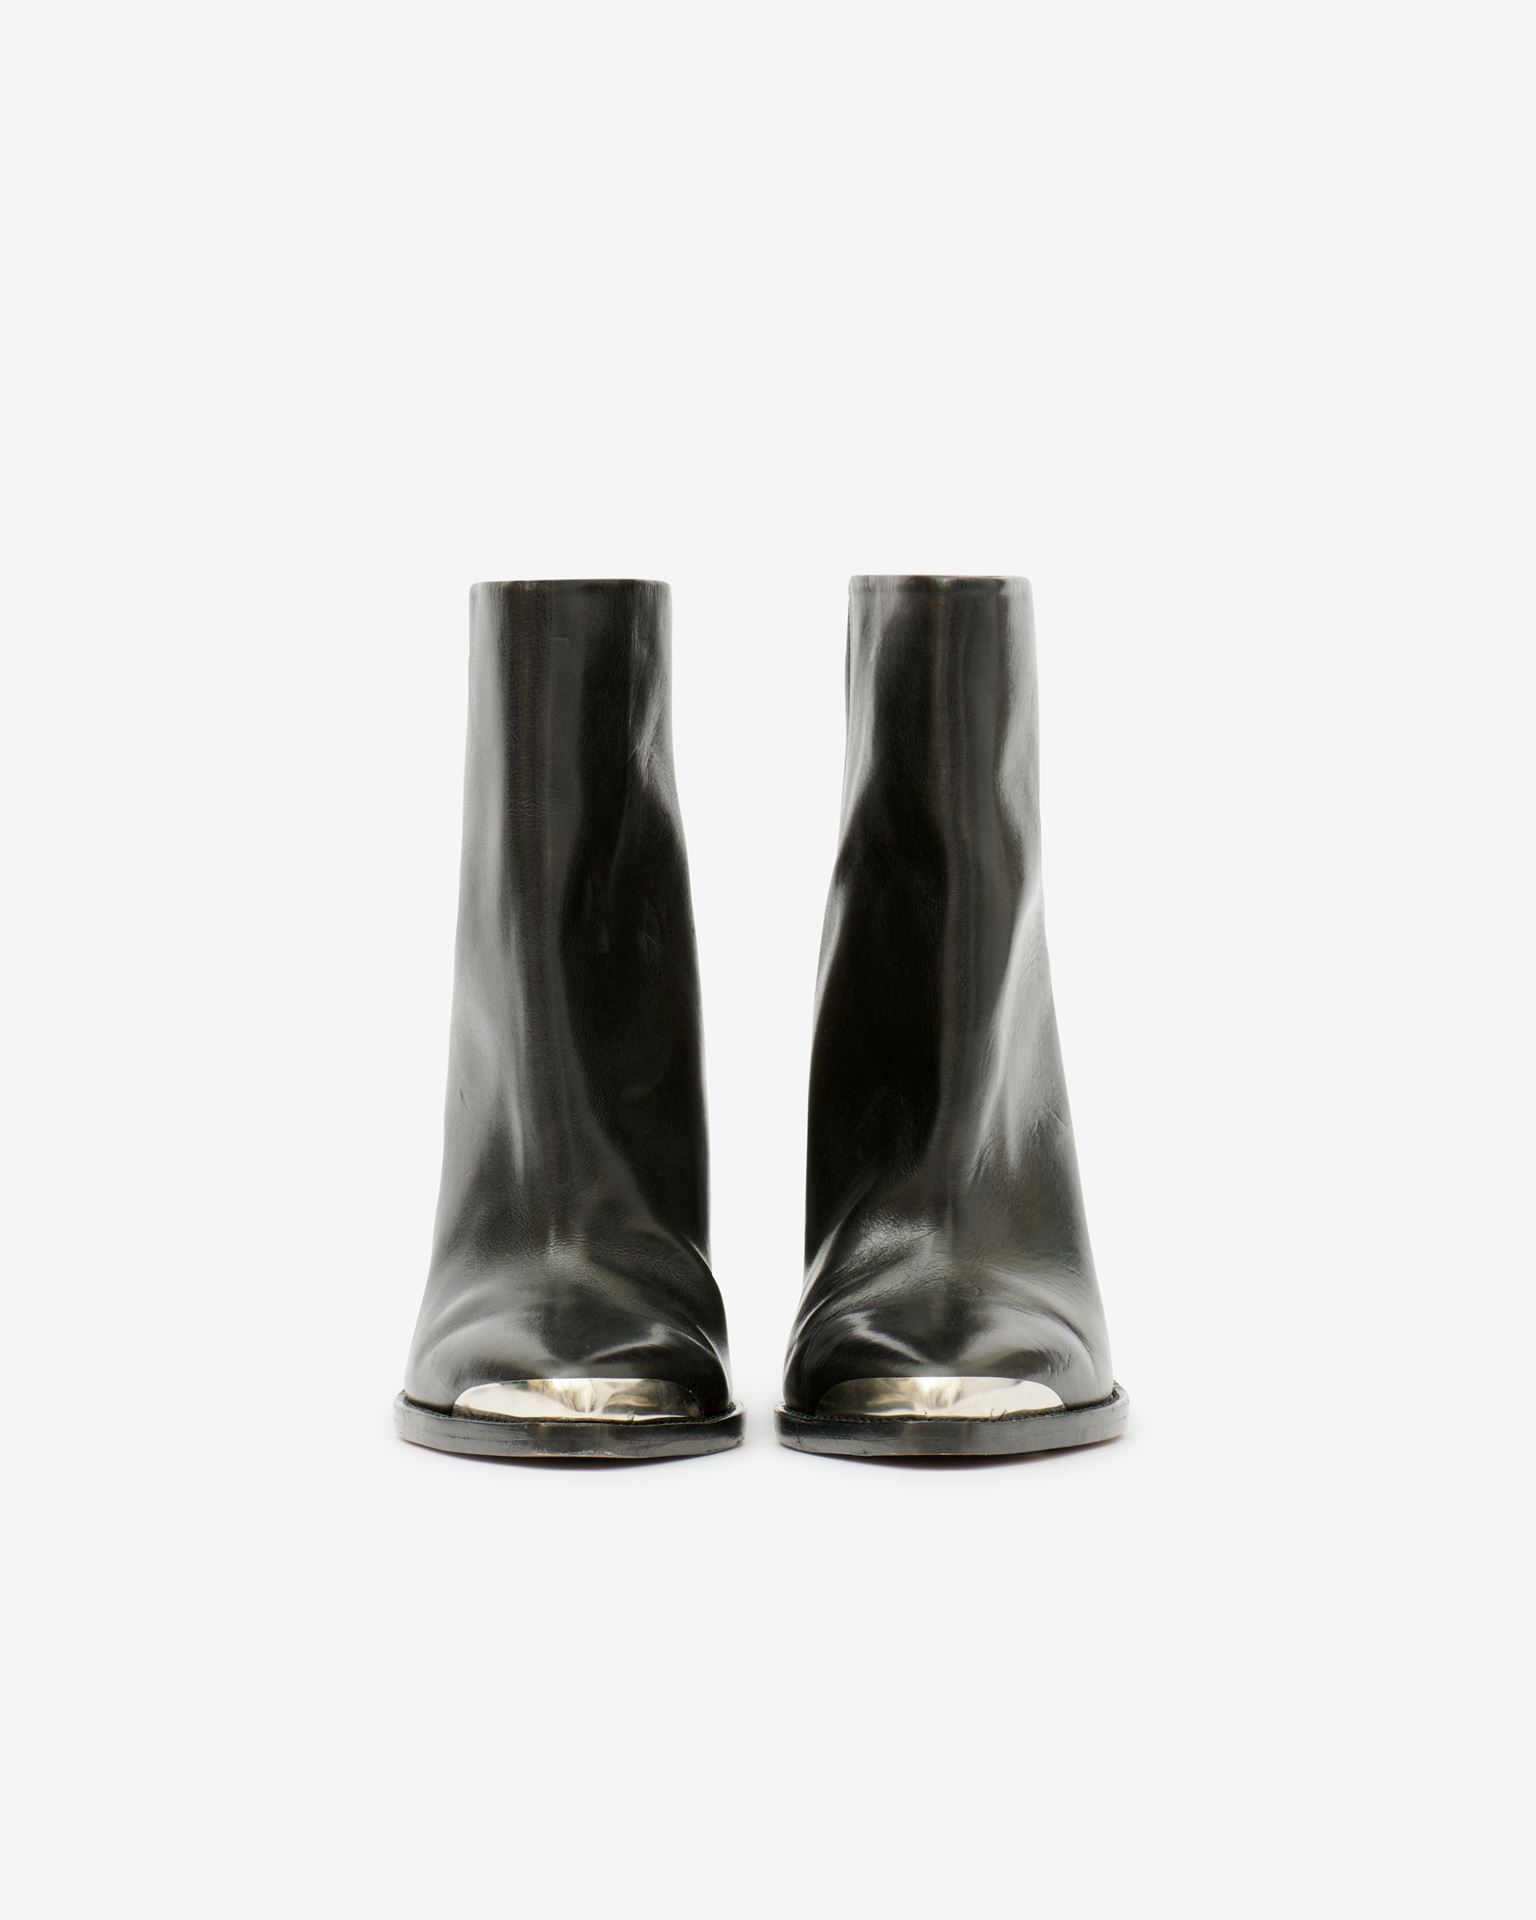 ISABEL MARANT, LADEL LOW BOOTS - Mujer - Negro